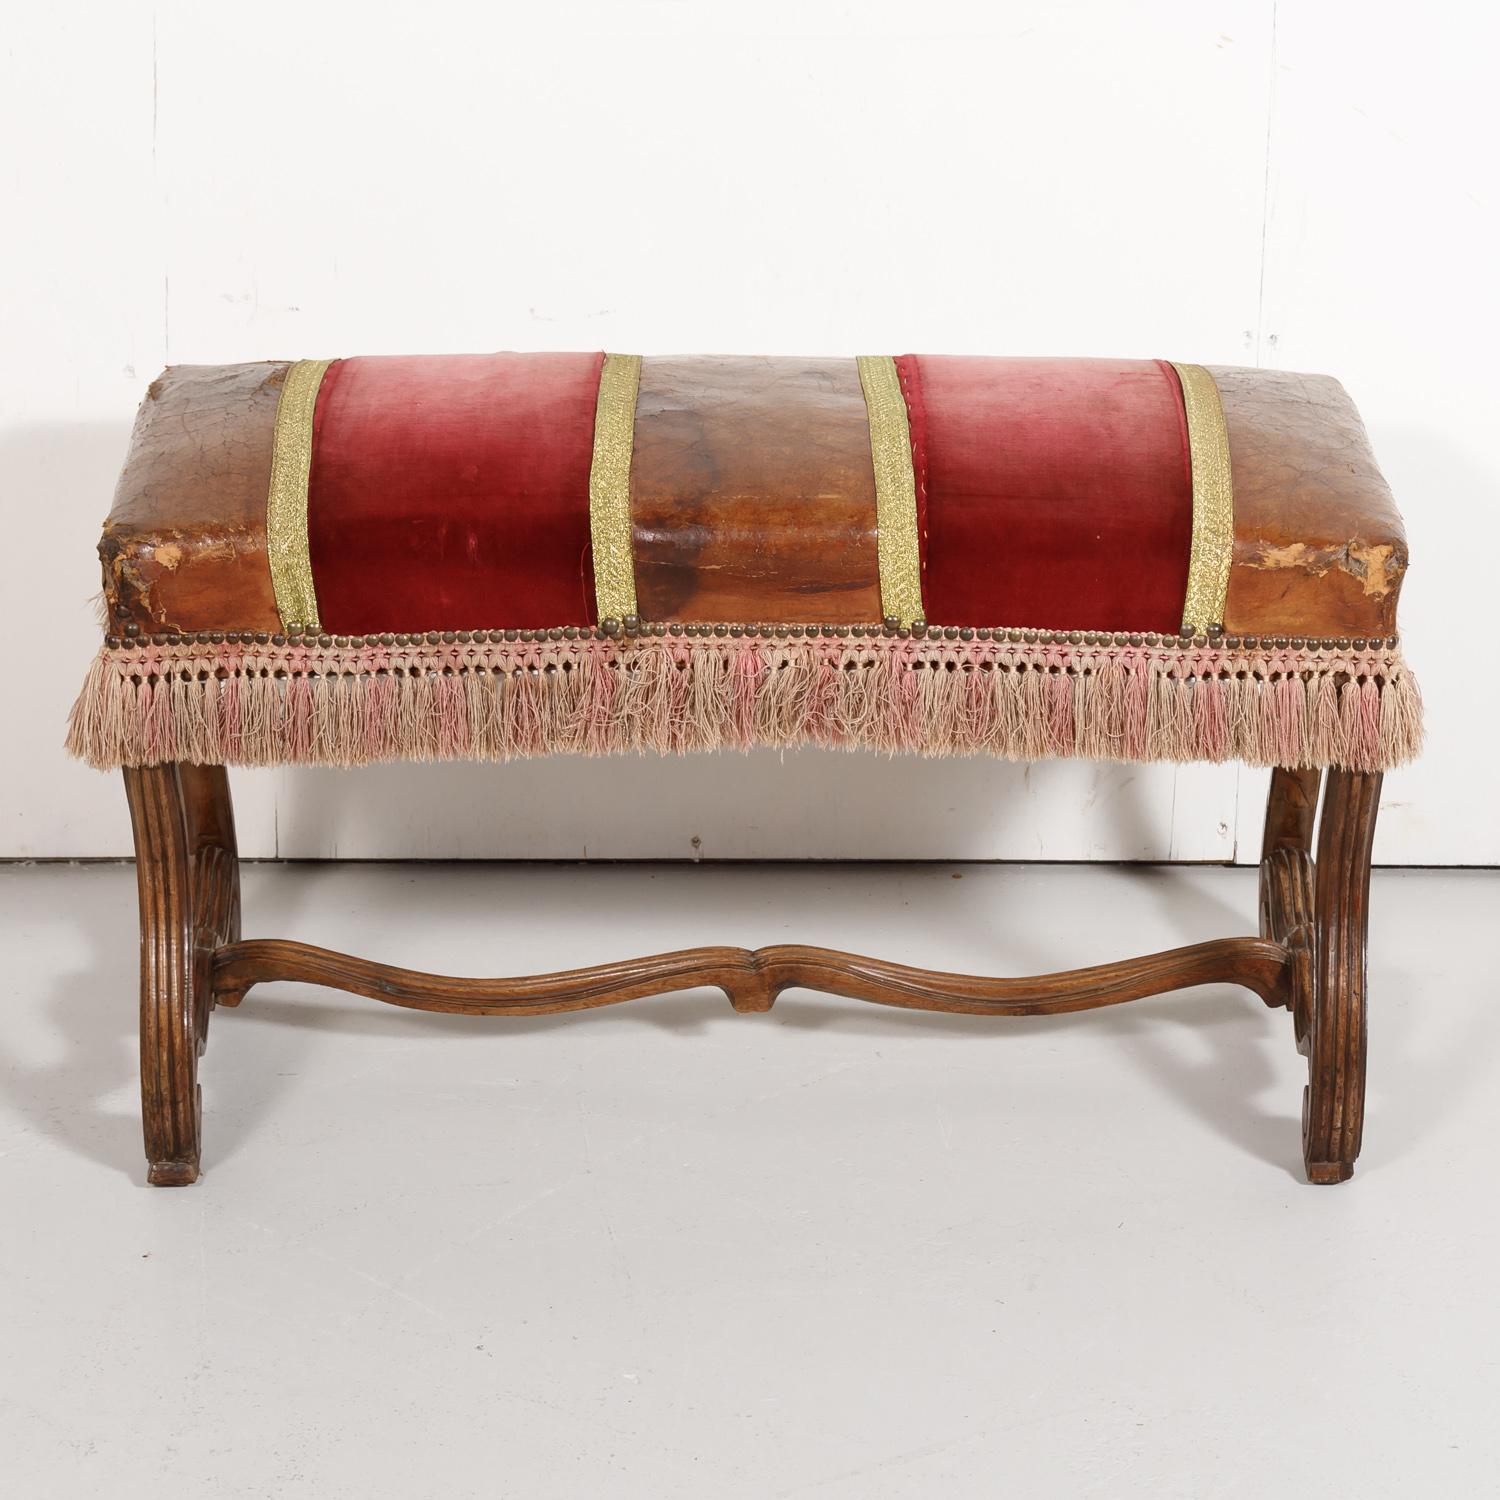 19th century Spanish Louis XIV style bench or stool having original leather and red velvet upholstery with metallic trim tape and tri-colored brush fringe trim, circa 1890s. This handsome backless bench is raised on hand carved walnut os de mouton